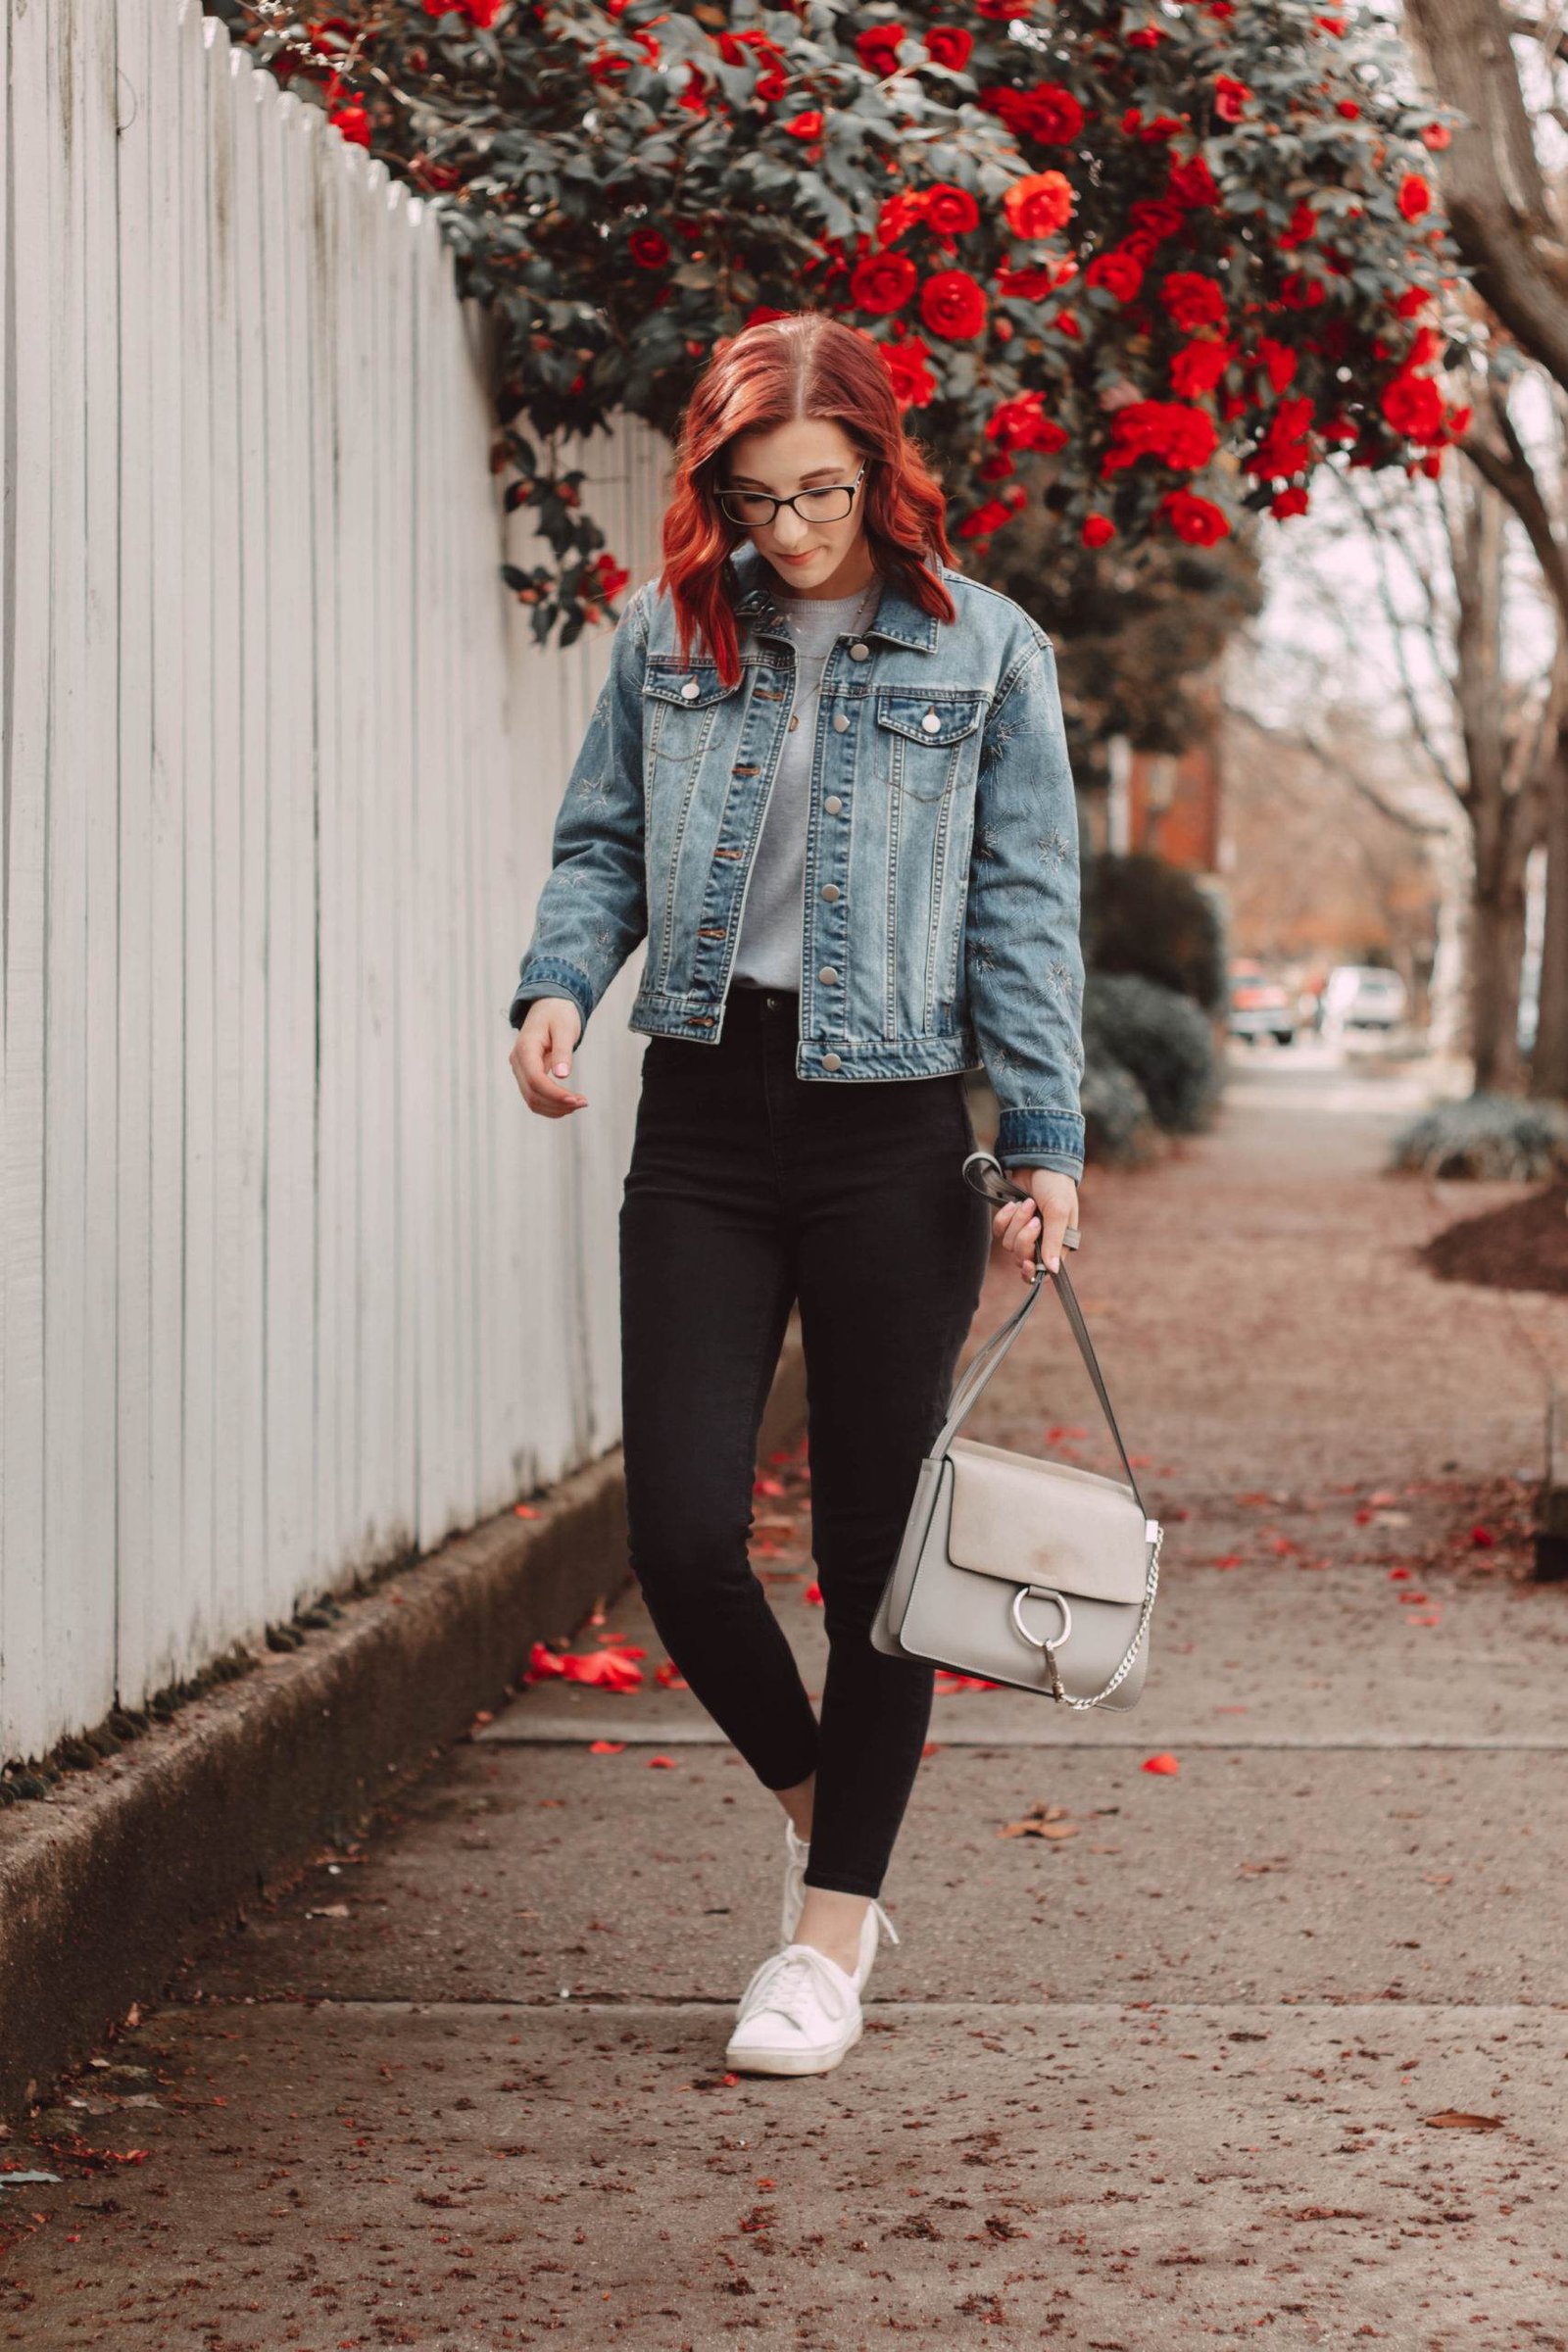 Outfit Ideas for Moms & Oversized Denim Jacket - LydiaLouise